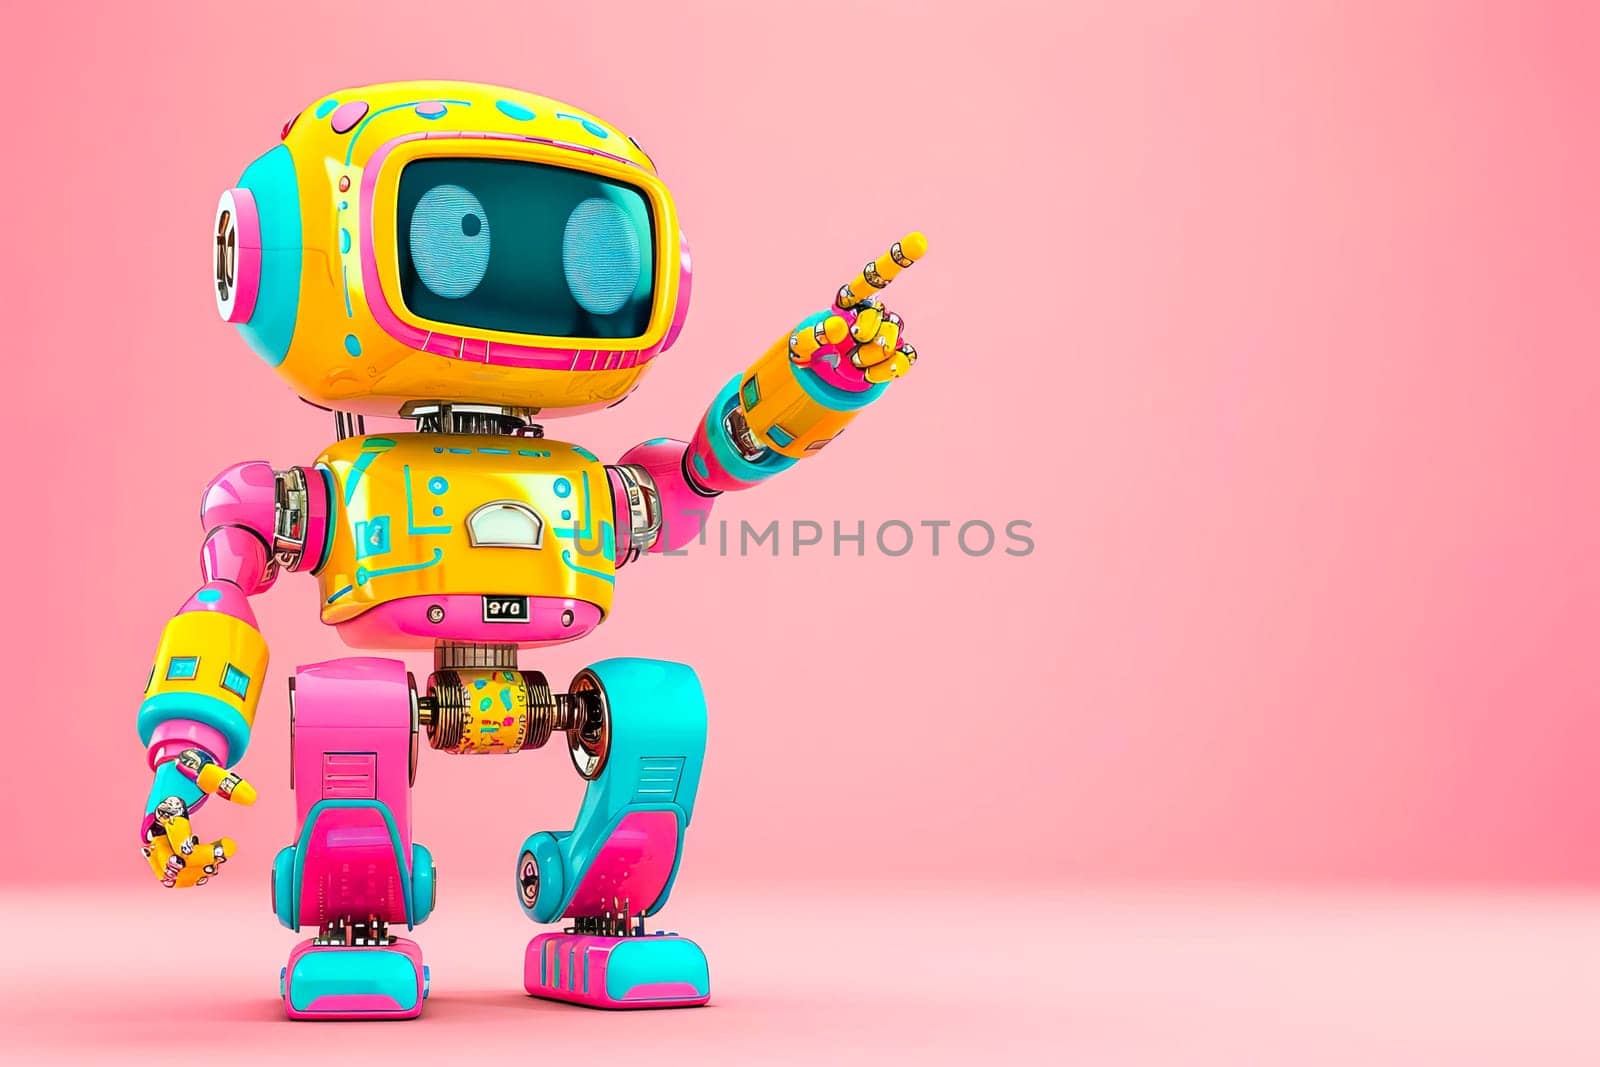 Colorful robot in pink and yellow, pointing somewhere, against a pink backdrop.